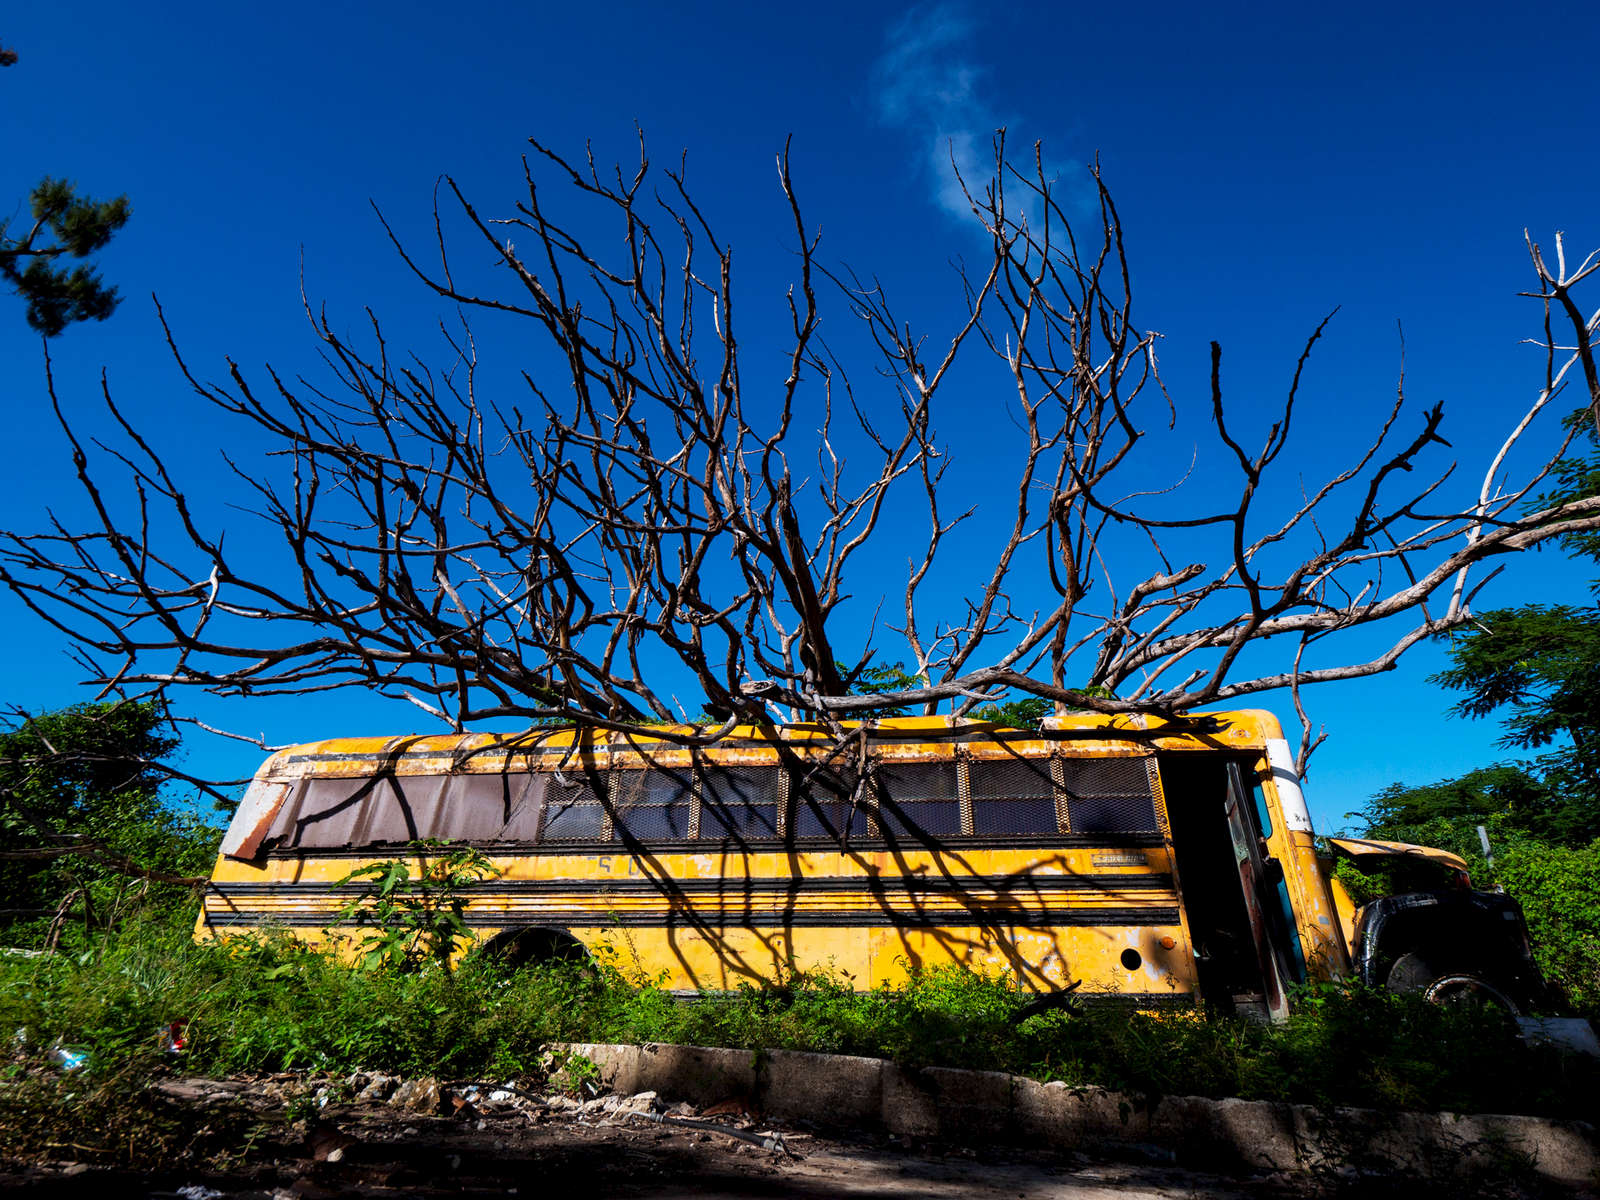 SANTURCE, PUERTO RICO - NOVEMBER 12:  A school bus is seen under a fallen tree on November 12, 2018 in Santurce, Puerto Rico. The tree fell on the bus during Hurricane Maria.  It has not been removed more than a year later.  The effort continues in Puerto Rico to remain and rebuild more than one year after the Hurricane Maria hit and devastated the island on September 20, 2017. The official number of deaths from the disaster is 2,975. 